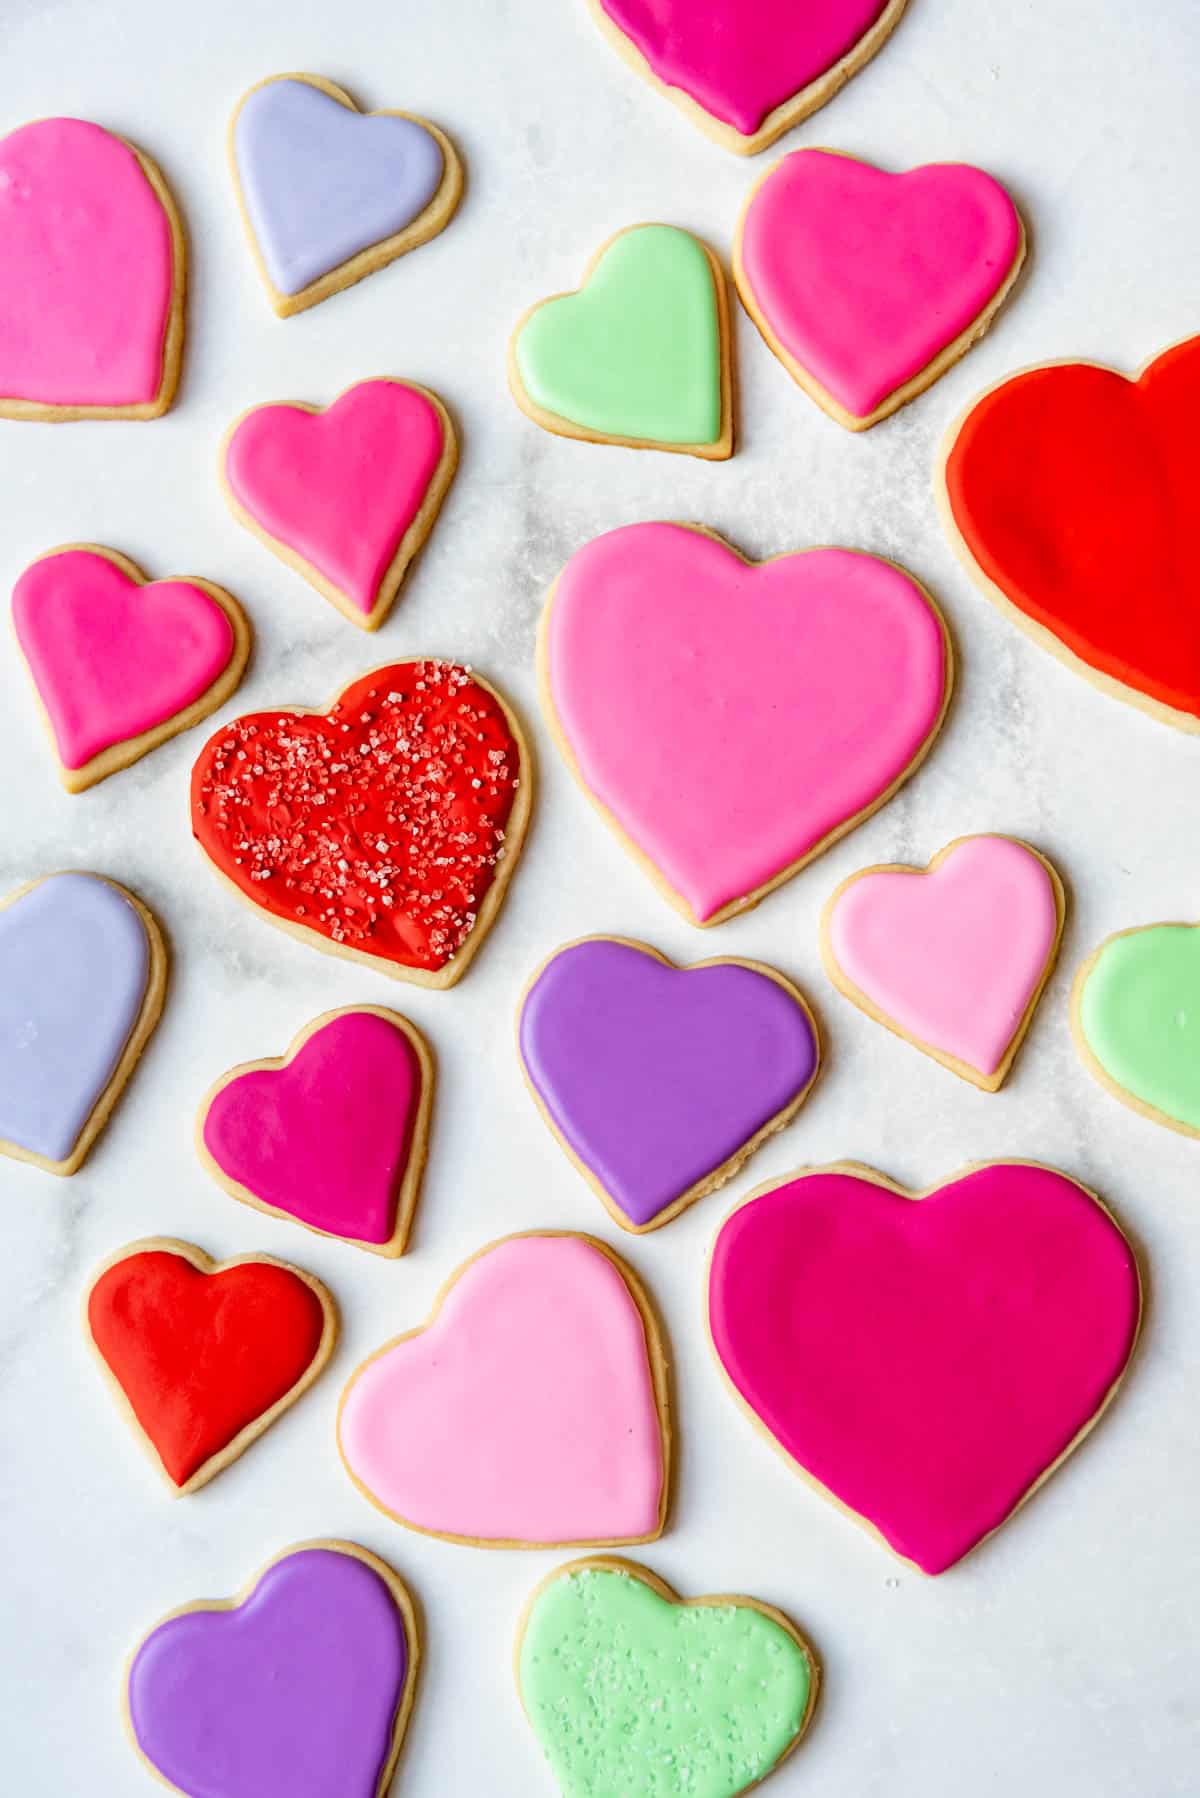 Heart shaped sugar cookies decorated with royal icing in reds, pinks, purples, and greens.